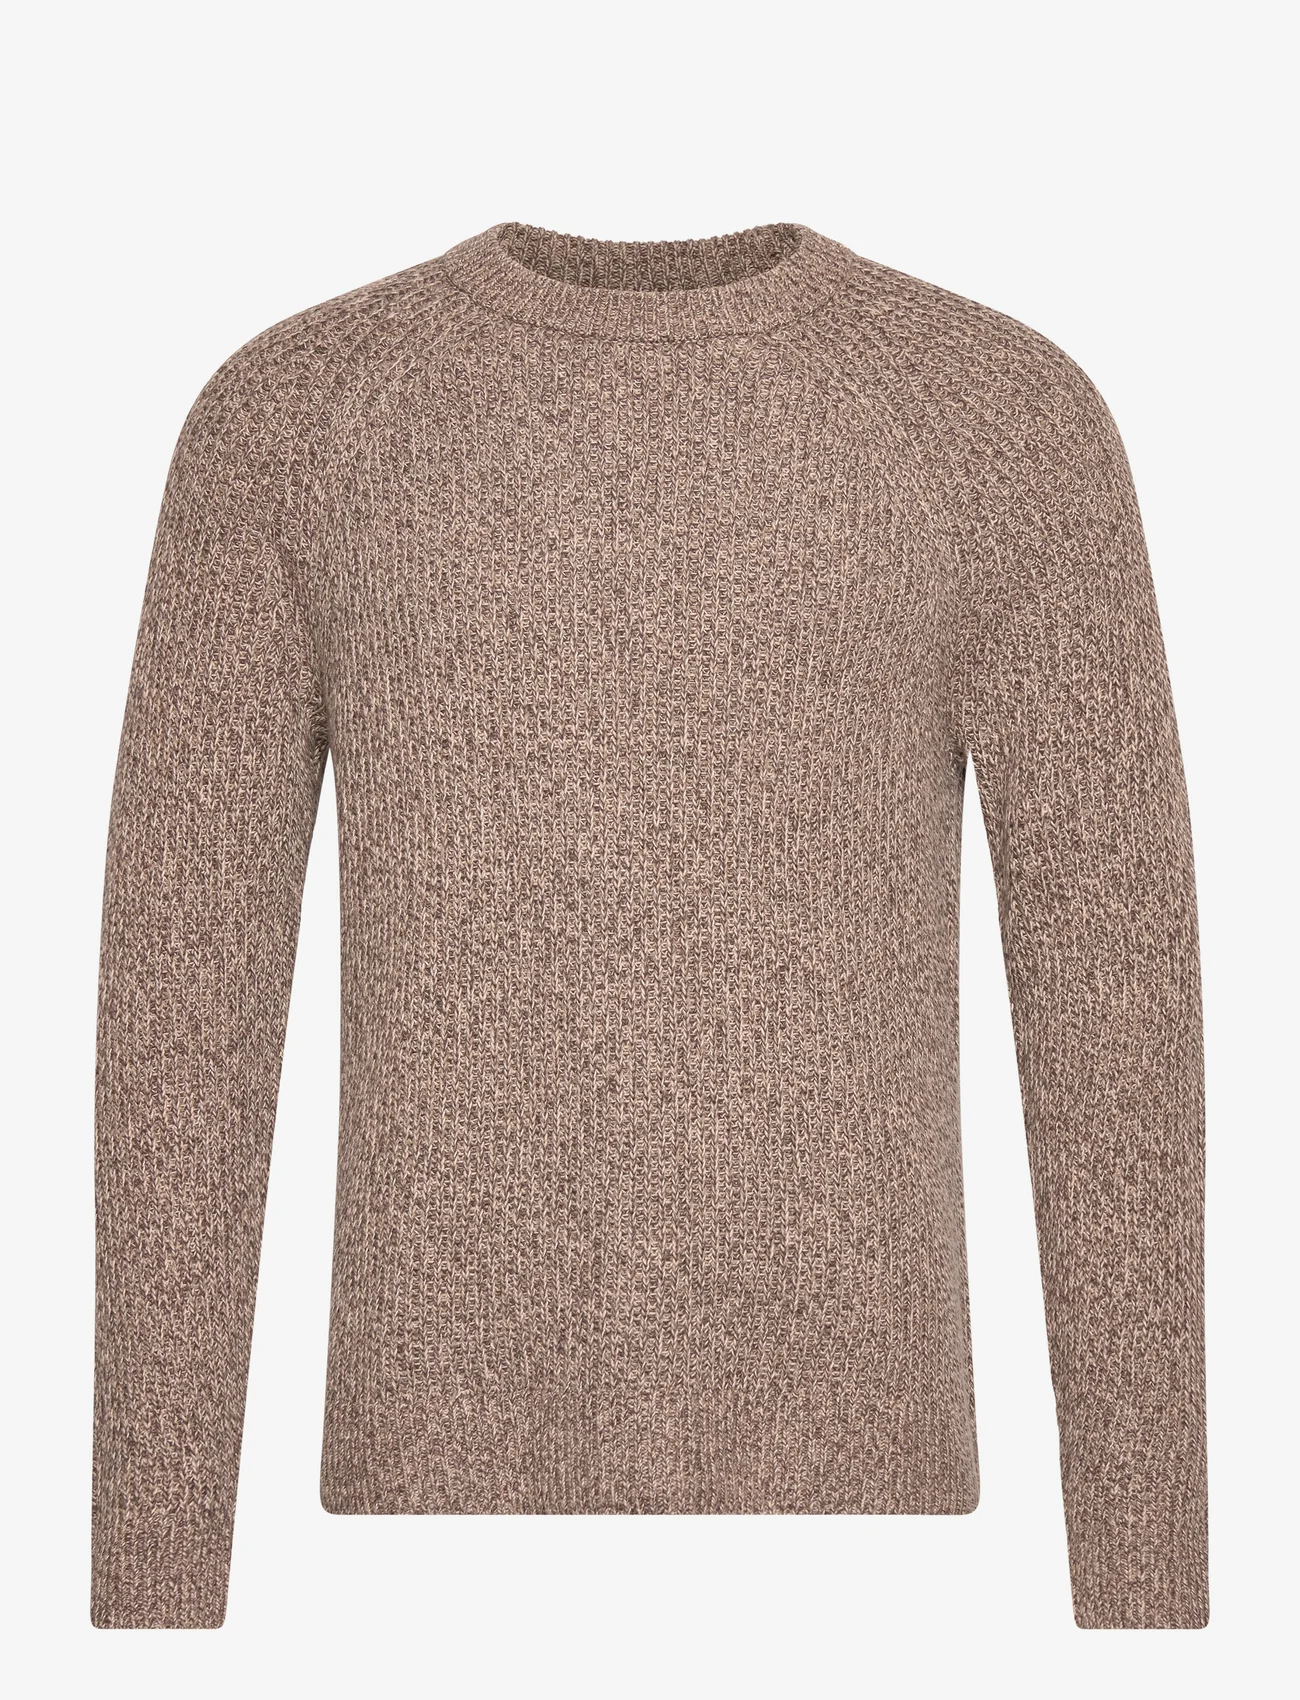 Abercrombie & Fitch - ANF MENS SWEATERS - truien met ronde hals - brown marl - 0